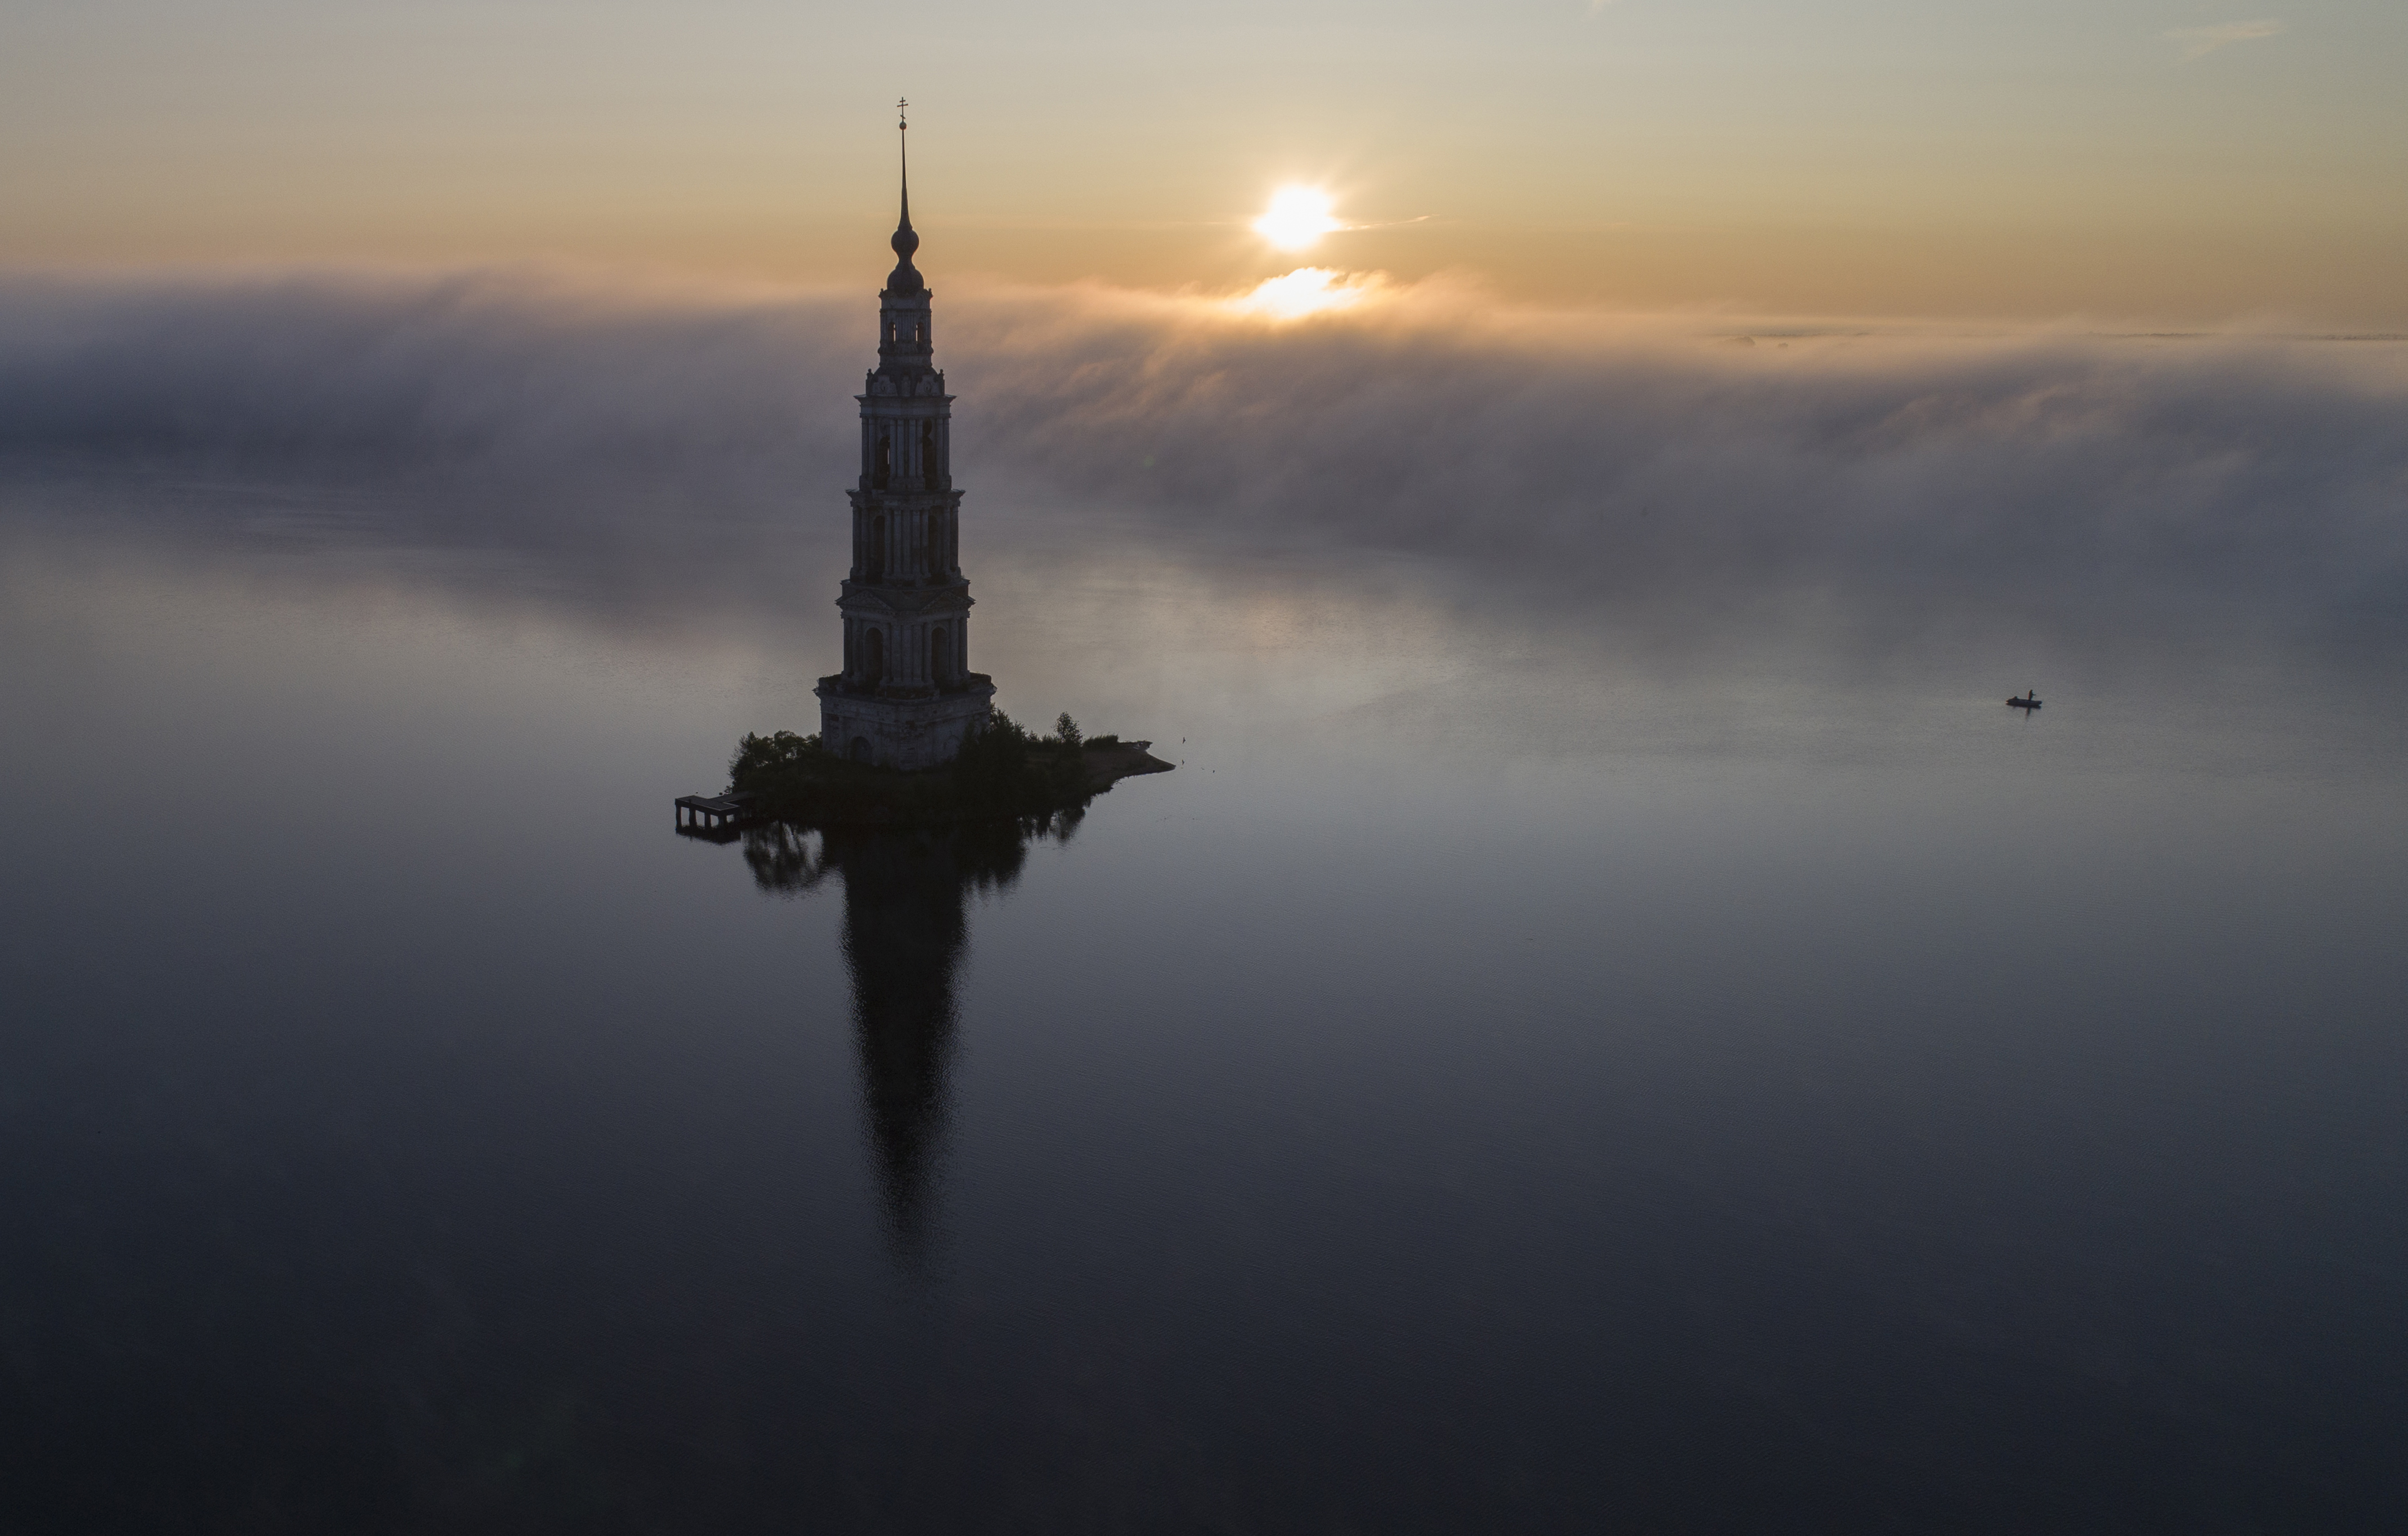 The famous Kalyazin Bell Tower, part of the submerged monastery of St. Nicholas, is seen in the morning fog in the town of Kalyazin located on the Volga River, 180 km (111 miles) north-east of Moscow, Russia, Monday, Aug. 12, 2019. After the construction of the Uglich Dam in 1939 to form the Uglich Reservoir, the old parts of Kalyazin, including several medieval structures, were submerged under the reservoir's waters. (AP Photo/Dmitri Lovetsky)